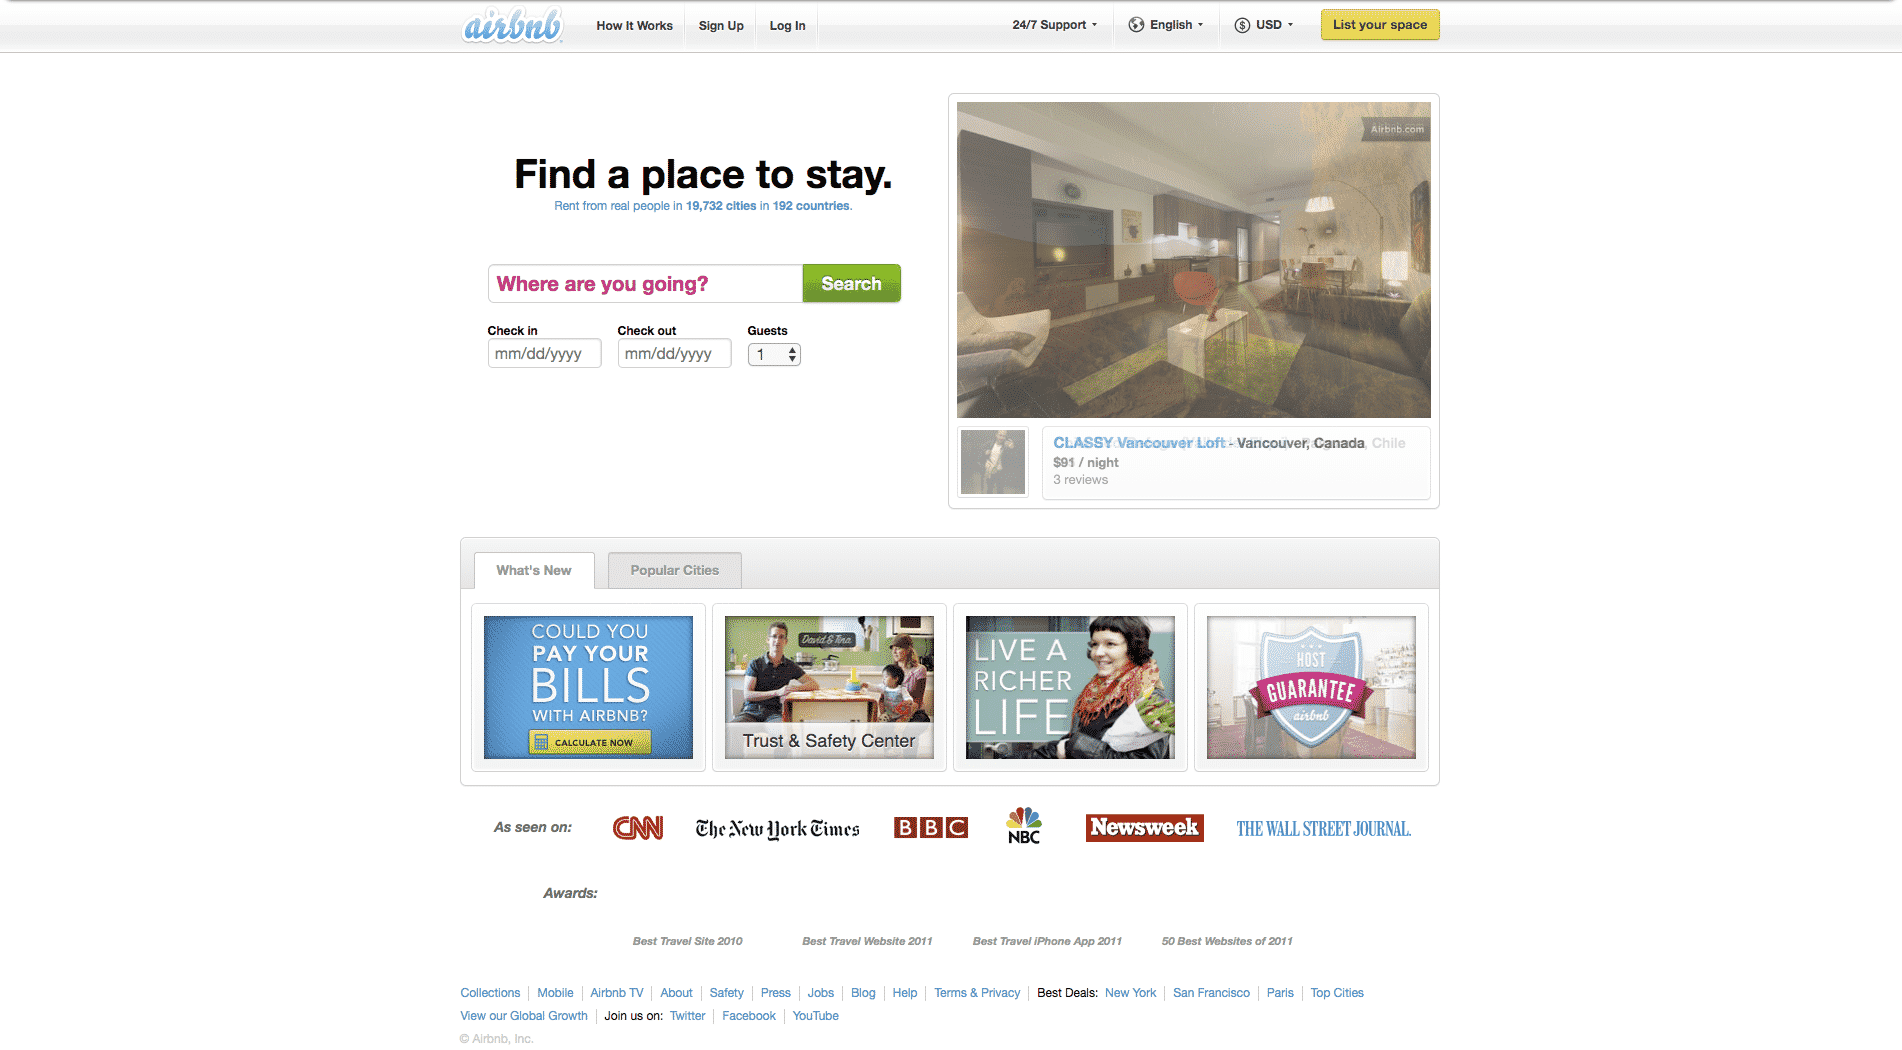 Airbnb's old website